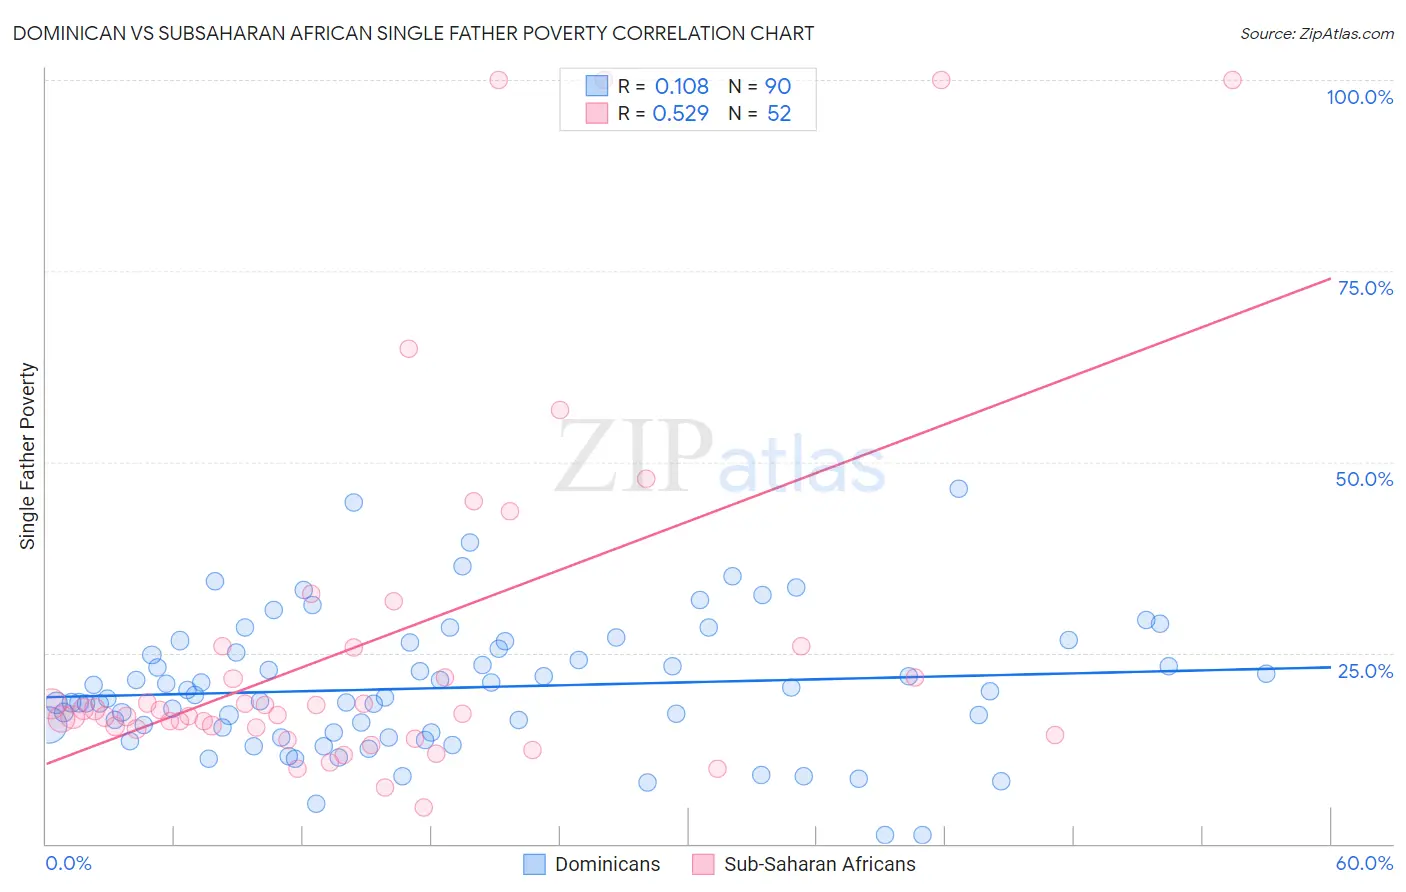 Dominican vs Subsaharan African Single Father Poverty